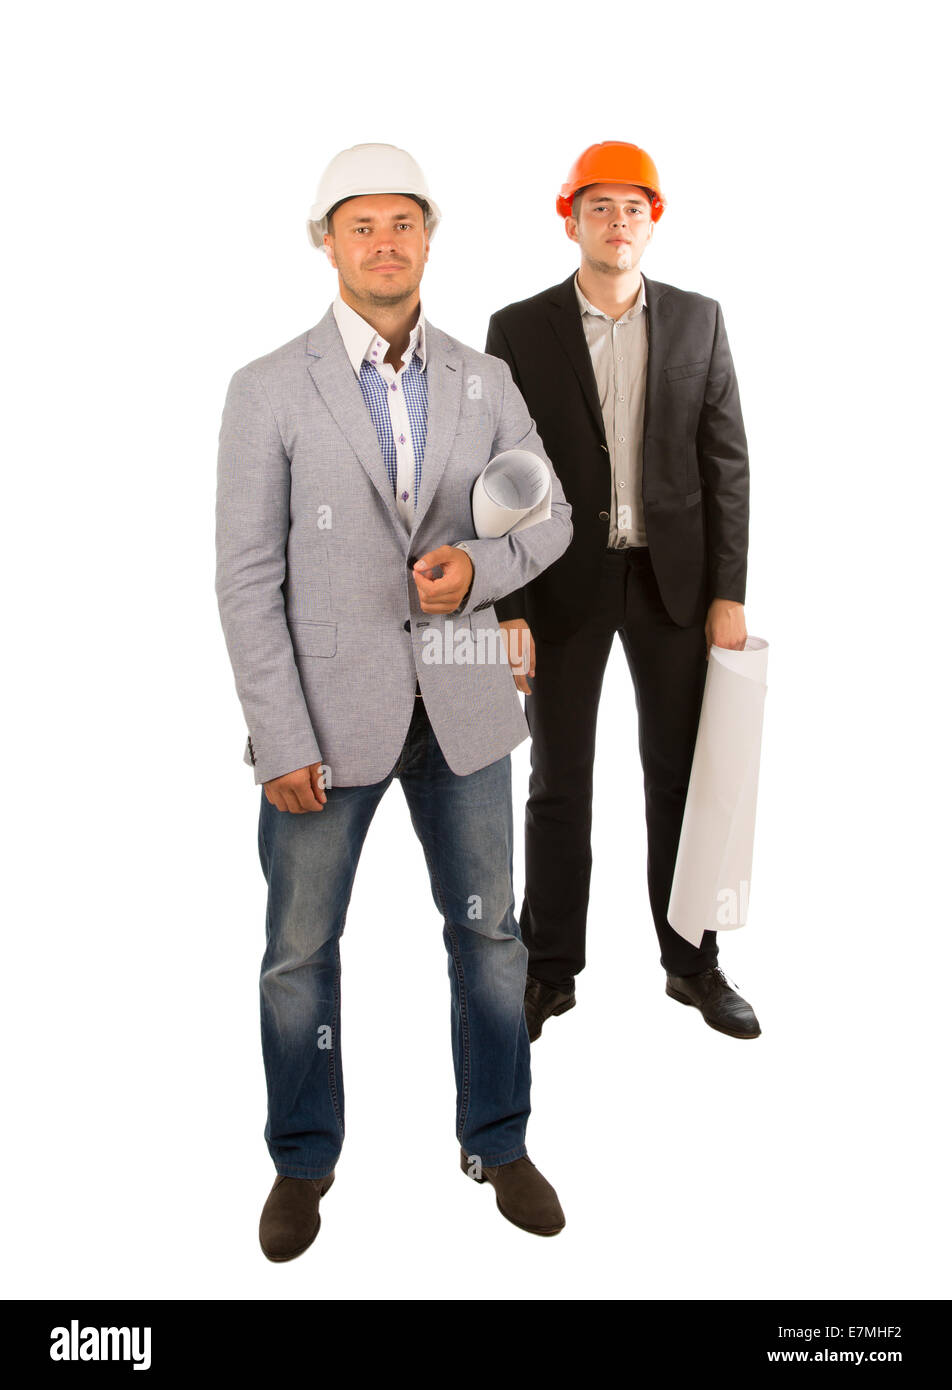 Full Body Middle Age Engineers Looking at Camera. Isolated on White Background. Stock Photo